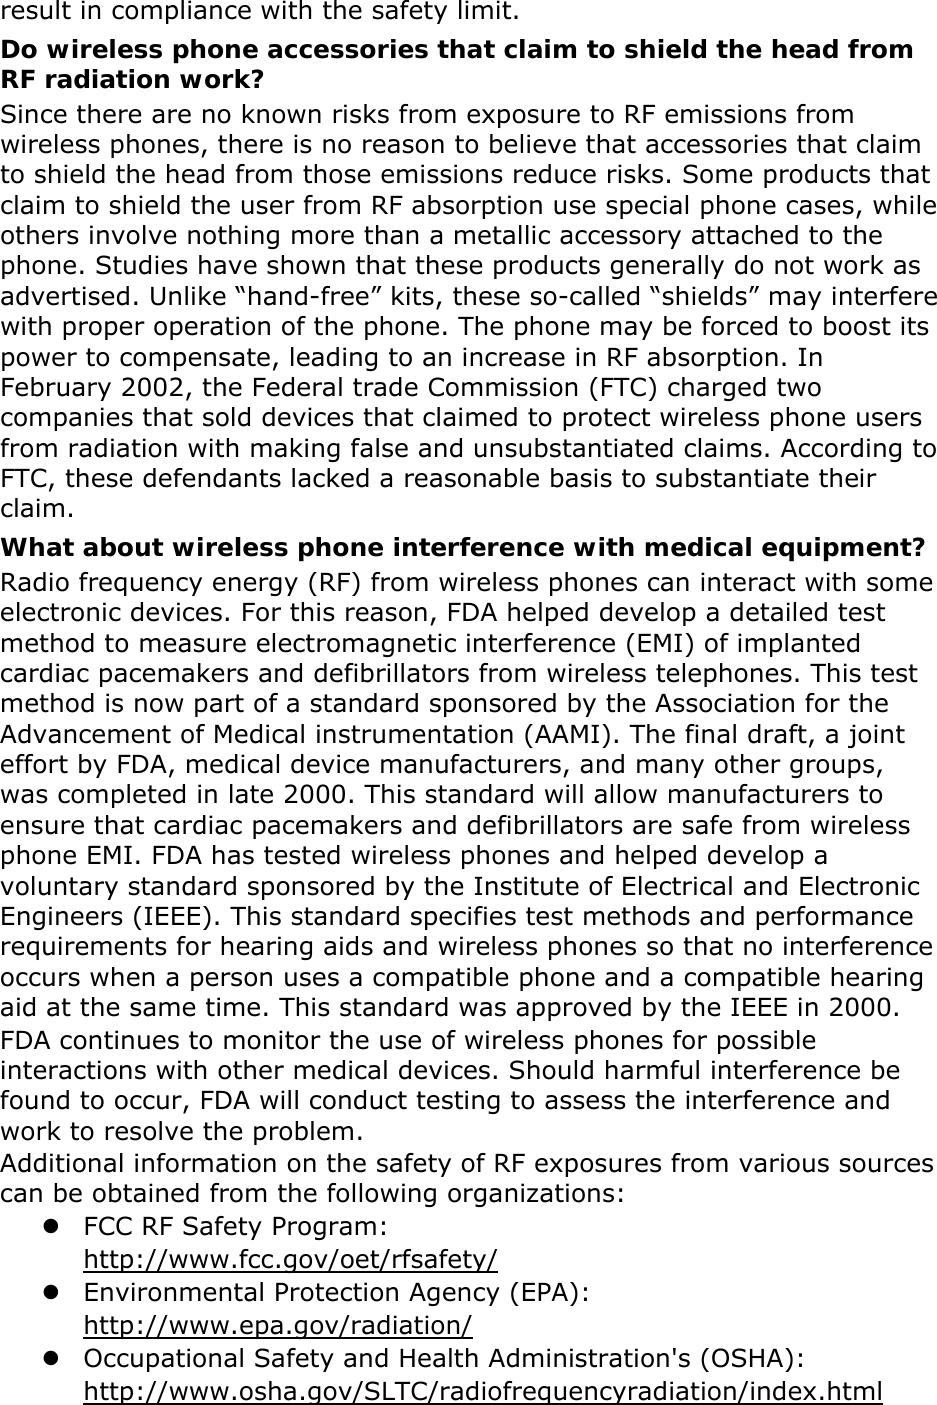 result in compliance with the safety limit. Do wireless phone accessories that claim to shield the head from RF radiation work? Since there are no known risks from exposure to RF emissions from wireless phones, there is no reason to believe that accessories that claim to shield the head from those emissions reduce risks. Some products that claim to shield the user from RF absorption use special phone cases, while others involve nothing more than a metallic accessory attached to the phone. Studies have shown that these products generally do not work as advertised. Unlike “hand-free” kits, these so-called “shields” may interfere with proper operation of the phone. The phone may be forced to boost its power to compensate, leading to an increase in RF absorption. In February 2002, the Federal trade Commission (FTC) charged two companies that sold devices that claimed to protect wireless phone users from radiation with making false and unsubstantiated claims. According to FTC, these defendants lacked a reasonable basis to substantiate their claim. What about wireless phone interference with medical equipment? Radio frequency energy (RF) from wireless phones can interact with some electronic devices. For this reason, FDA helped develop a detailed test method to measure electromagnetic interference (EMI) of implanted cardiac pacemakers and defibrillators from wireless telephones. This test method is now part of a standard sponsored by the Association for the Advancement of Medical instrumentation (AAMI). The final draft, a joint effort by FDA, medical device manufacturers, and many other groups, was completed in late 2000. This standard will allow manufacturers to ensure that cardiac pacemakers and defibrillators are safe from wireless phone EMI. FDA has tested wireless phones and helped develop a voluntary standard sponsored by the Institute of Electrical and Electronic Engineers (IEEE). This standard specifies test methods and performance requirements for hearing aids and wireless phones so that no interference occurs when a person uses a compatible phone and a compatible hearing aid at the same time. This standard was approved by the IEEE in 2000. FDA continues to monitor the use of wireless phones for possible interactions with other medical devices. Should harmful interference be found to occur, FDA will conduct testing to assess the interference and work to resolve the problem. Additional information on the safety of RF exposures from various sources can be obtained from the following organizations:  FCC RF Safety Program:  http://www.fcc.gov/oet/rfsafety/  Environmental Protection Agency (EPA):  http://www.epa.gov/radiation/  Occupational Safety and Health Administration&apos;s (OSHA):         http://www.osha.gov/SLTC/radiofrequencyradiation/index.html 